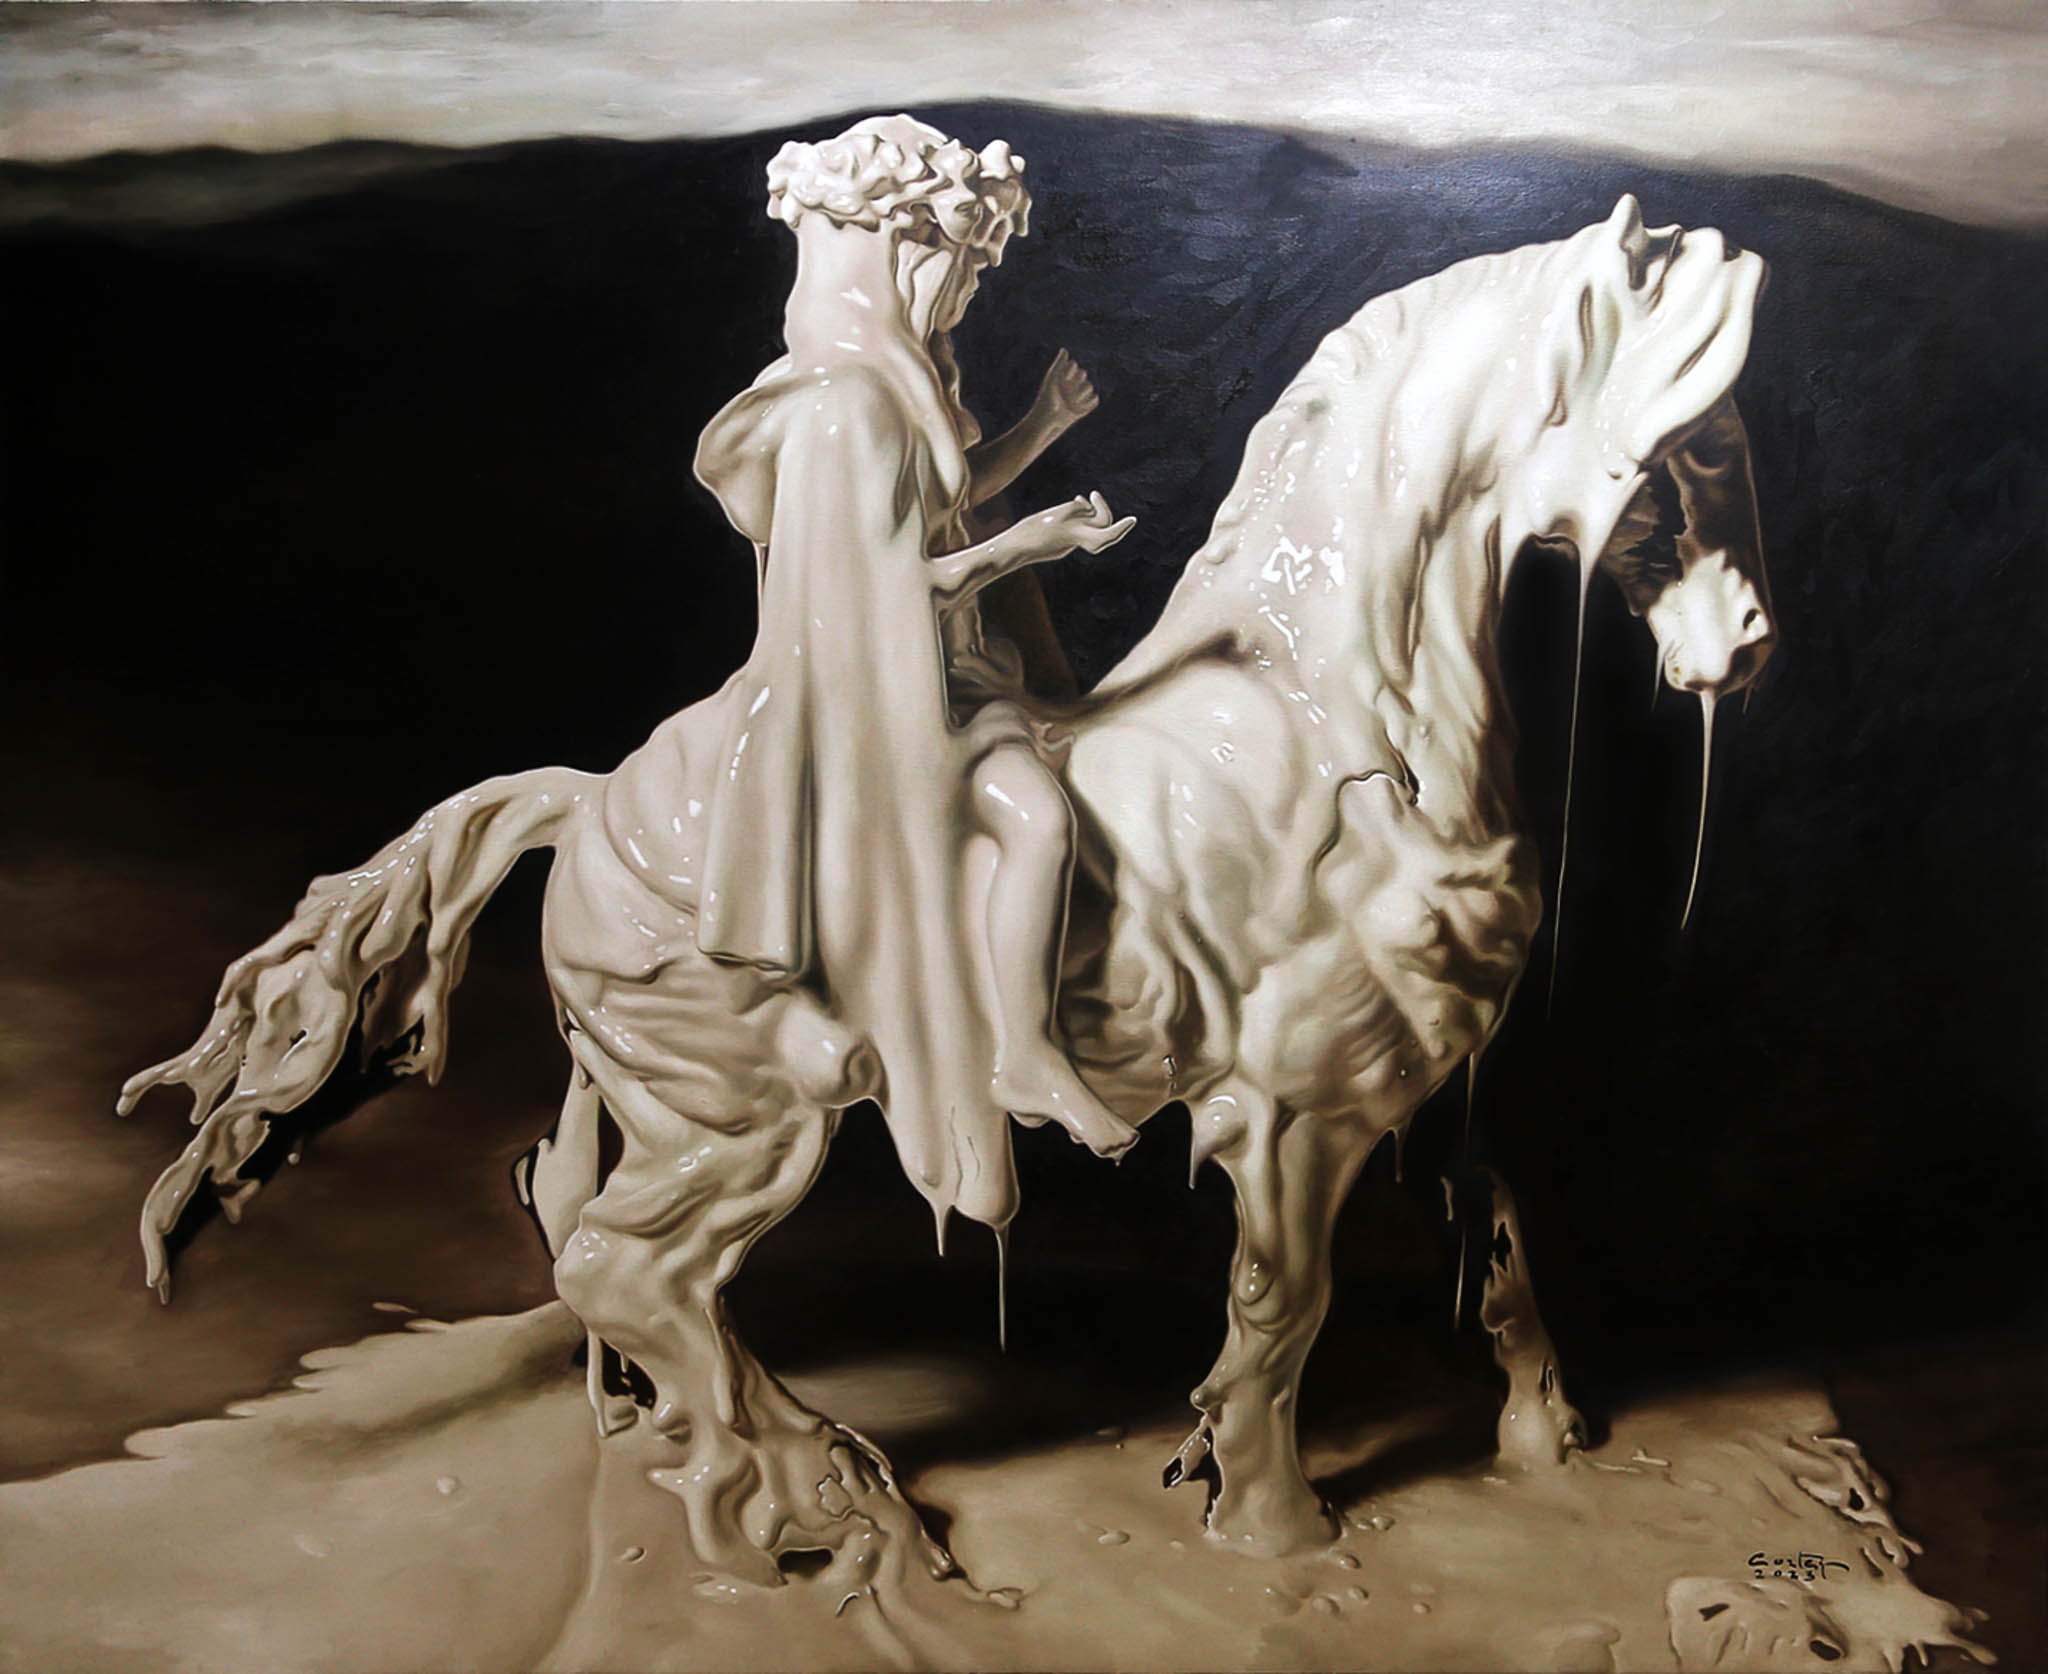 A white mixed media sculpture of a woman on a horse entitled "Reinforcement"